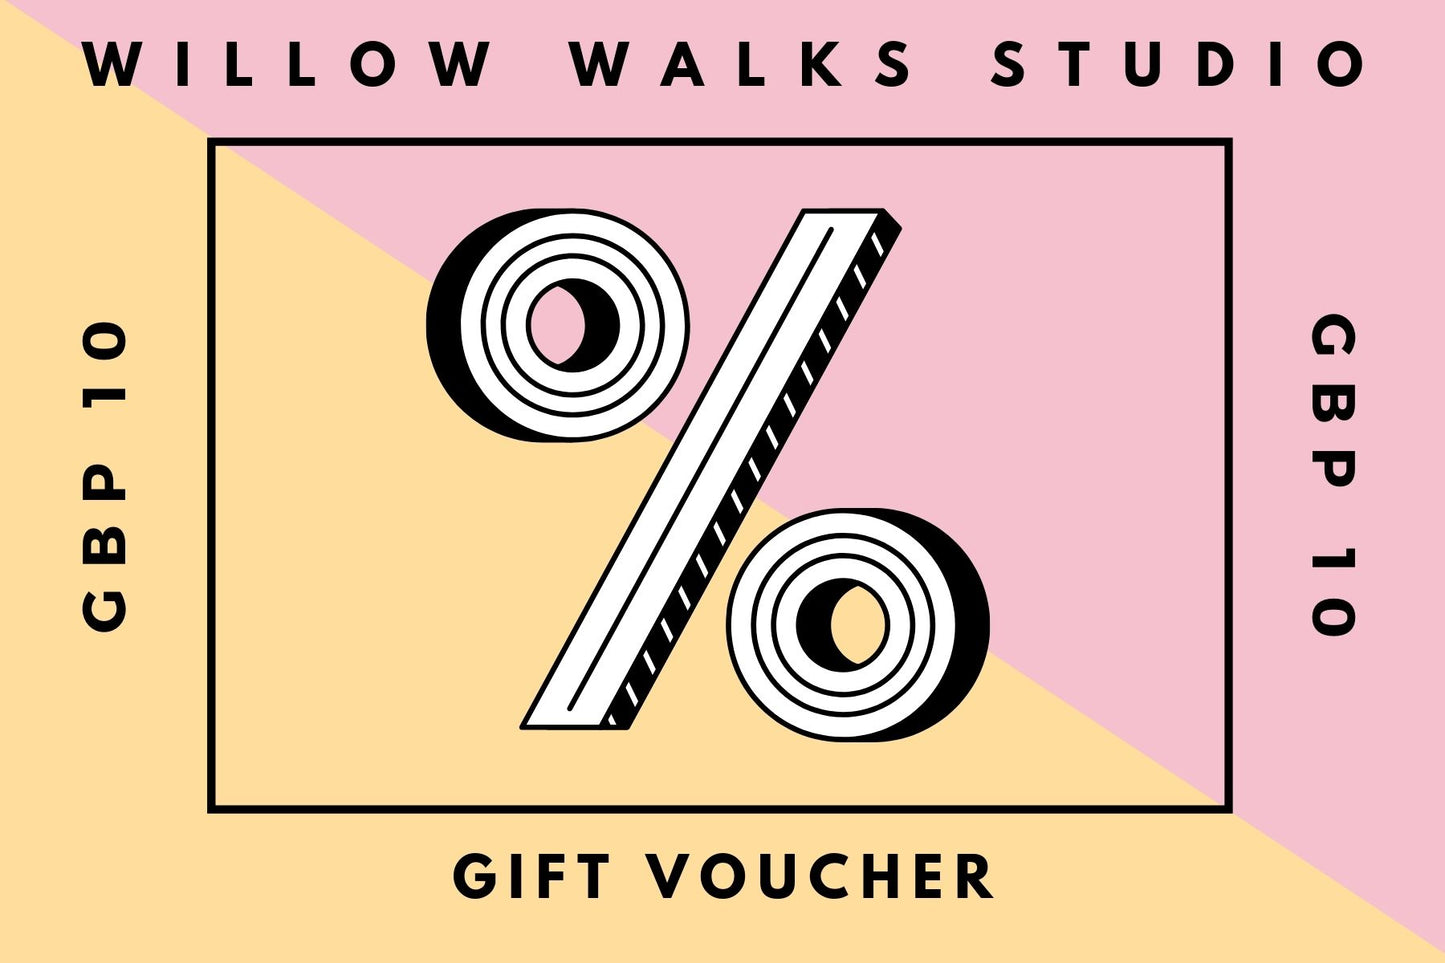 Willow Walks Gift Card